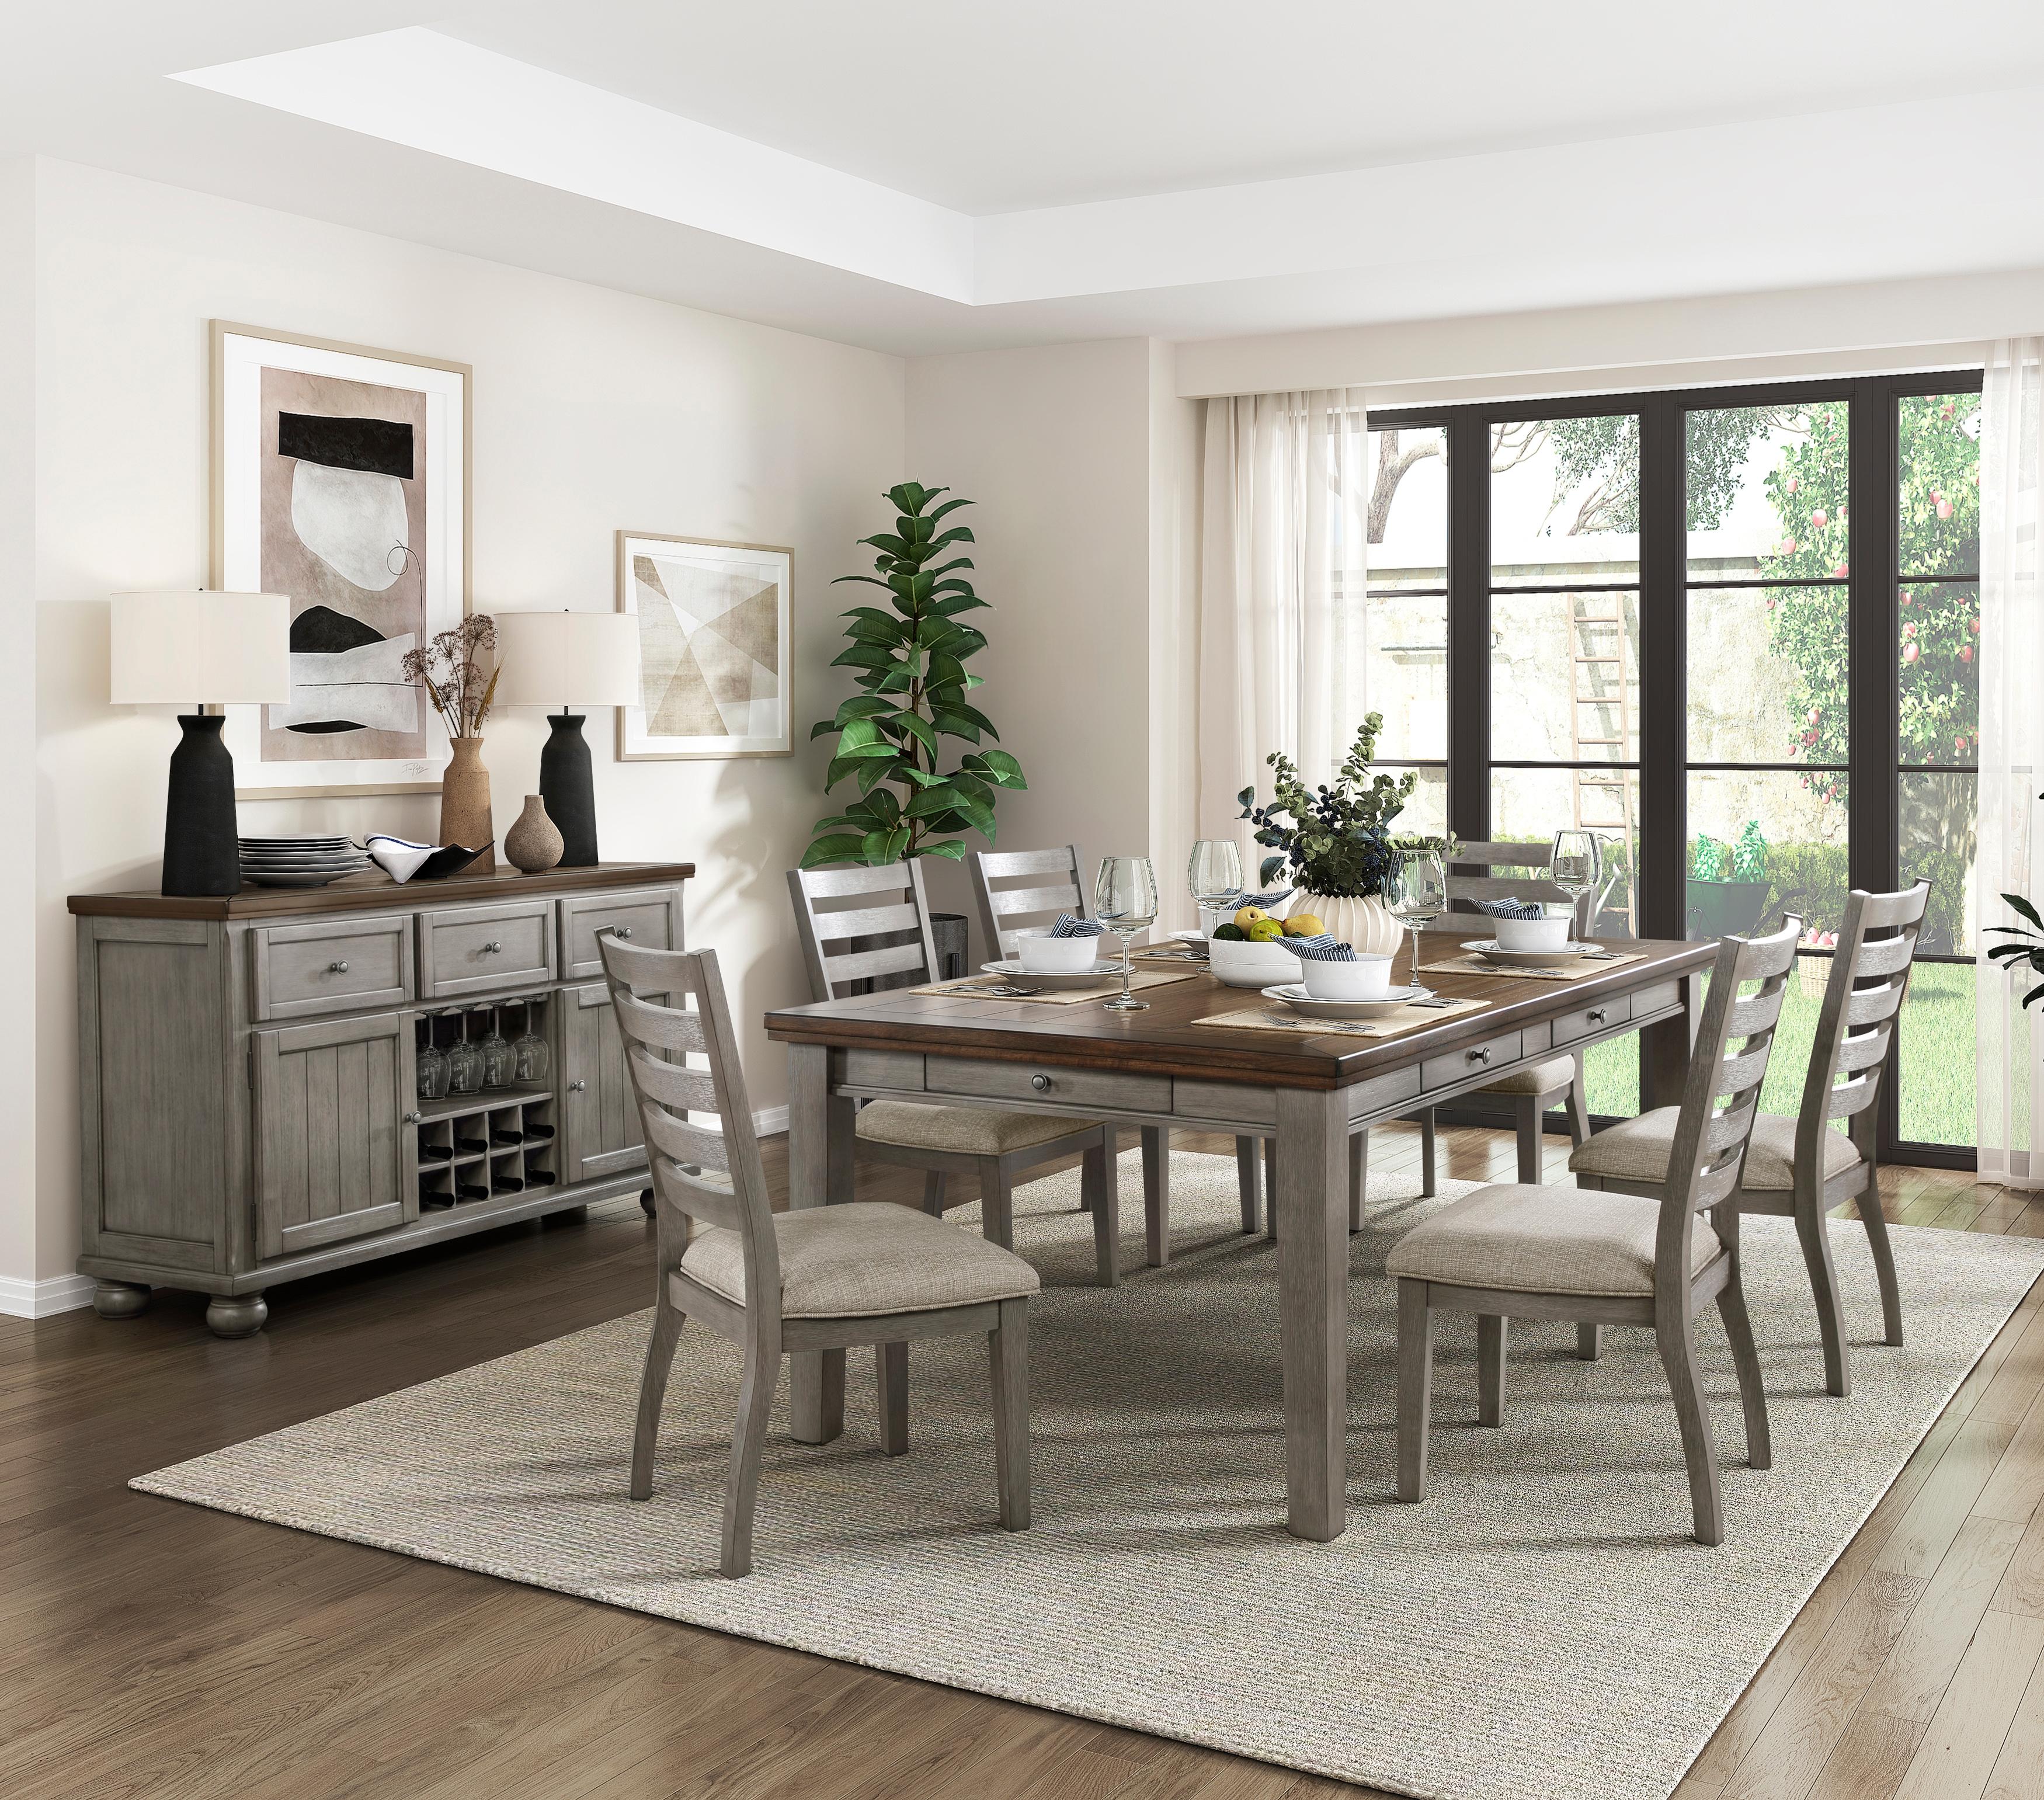 Modern, Traditional Dining Room Set Tigard Dining Room Set 7PCS 5761GY-78-T-7PCS 5761GY-78-T-7PCS in Cherry, Gray, Beige Fabric